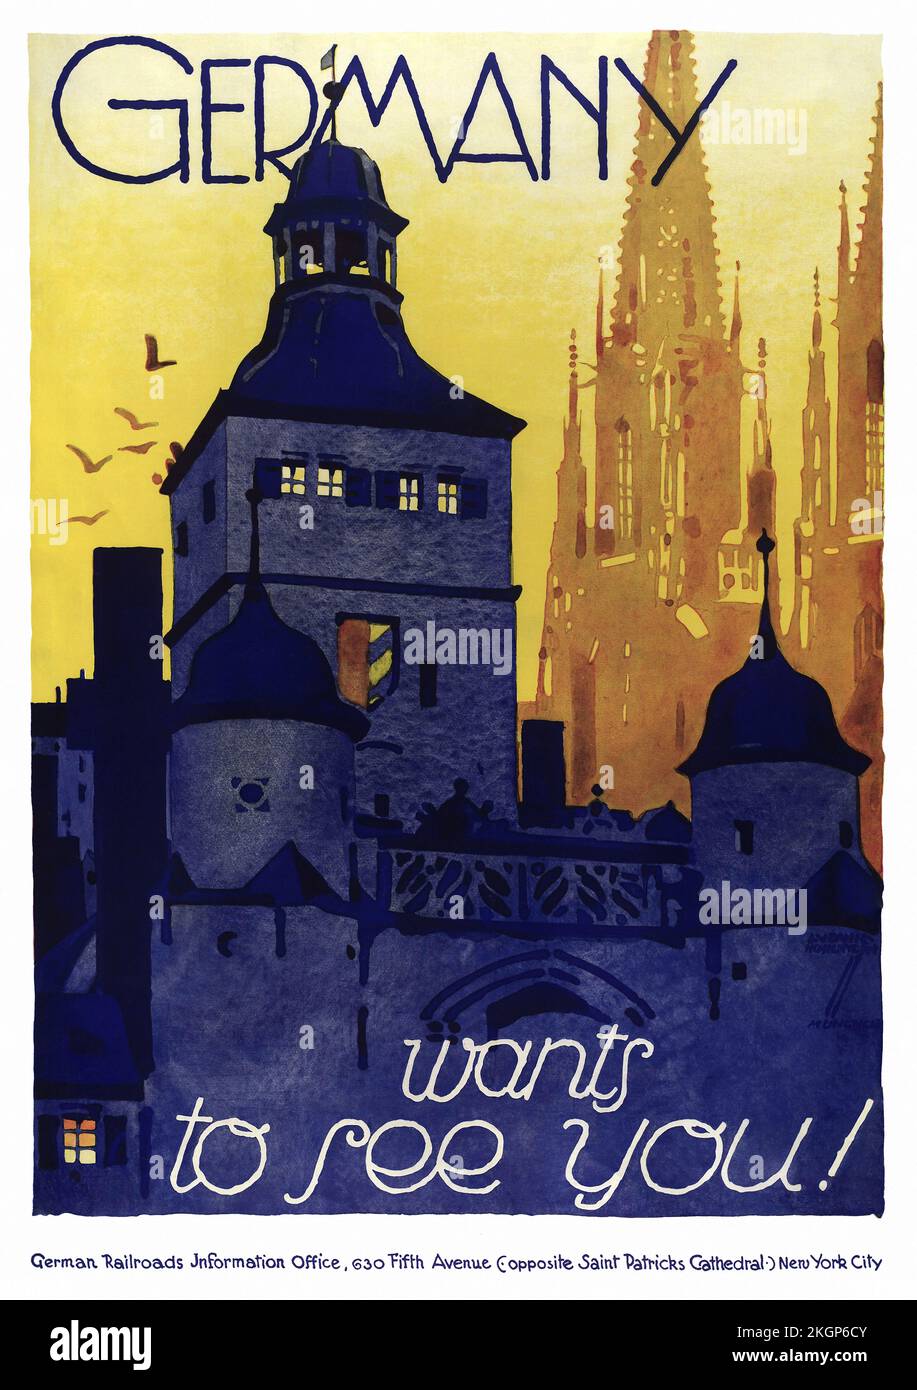 Germany wants to see you by Ludwig Hohlwein (1874-1949). Poster published in the 1920s. Stock Photo